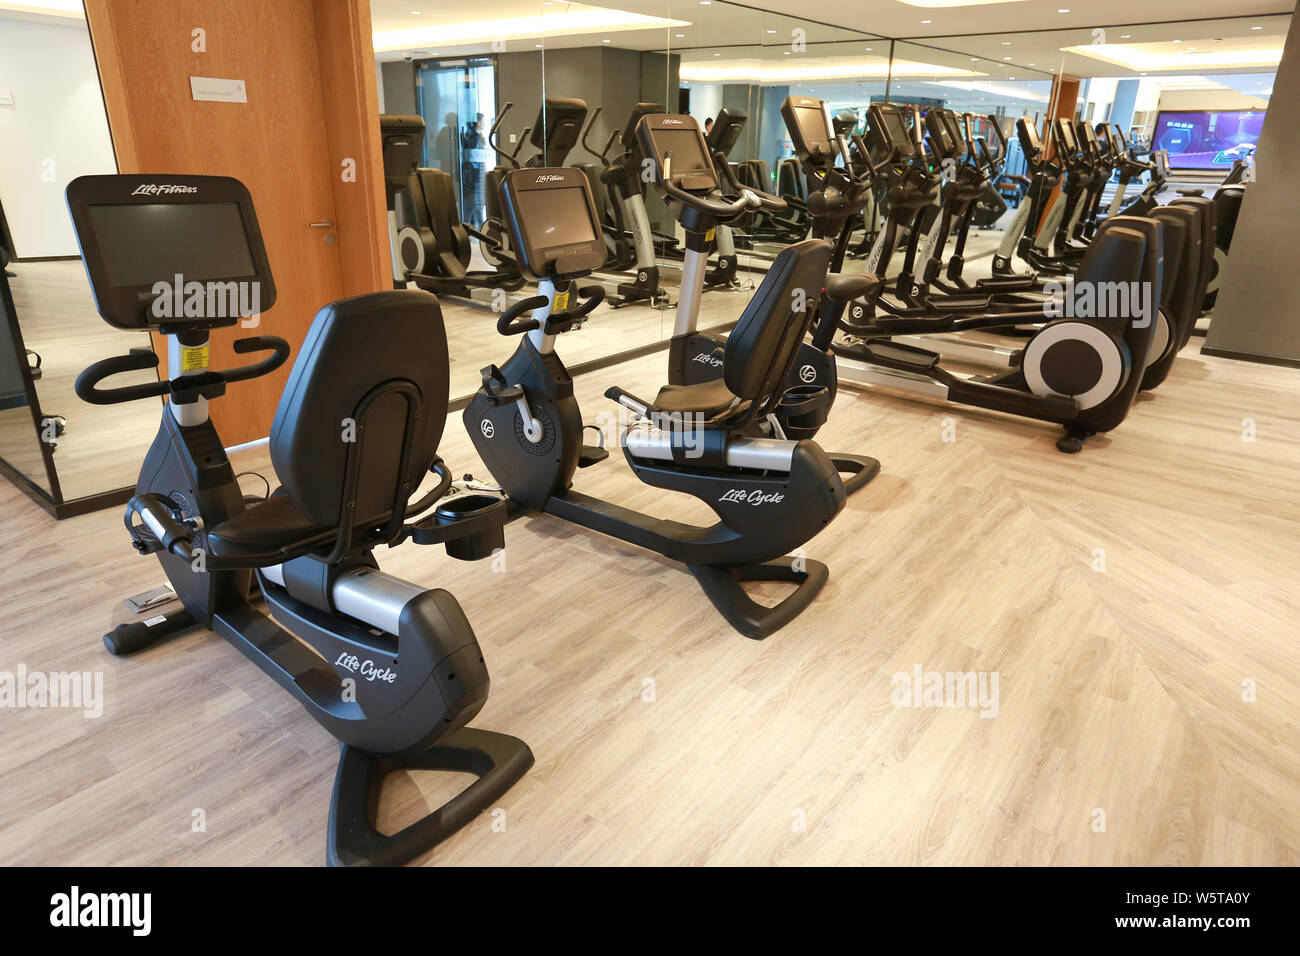 An interior view of a fitness center at Alibaba's futuristic hotel "Flyzoo  Hotel" in Hangzhou city, east China's Zhejiang province, 17 December 2018  Stock Photo - Alamy